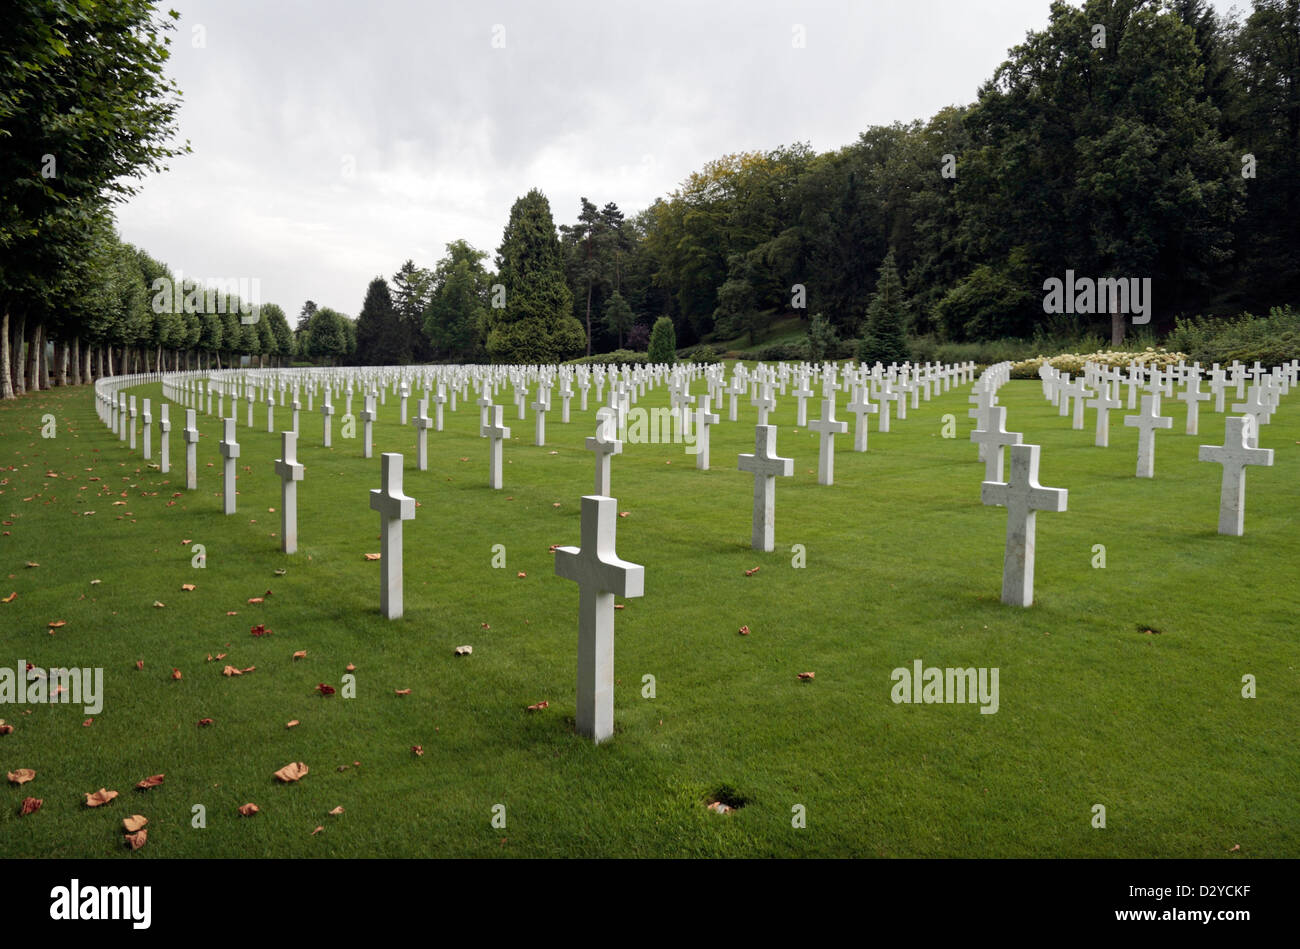 Headstones in the Aisne-Marne American Cemetery and Memorial, Belleau, near Chateau-Thierry, France. Stock Photo